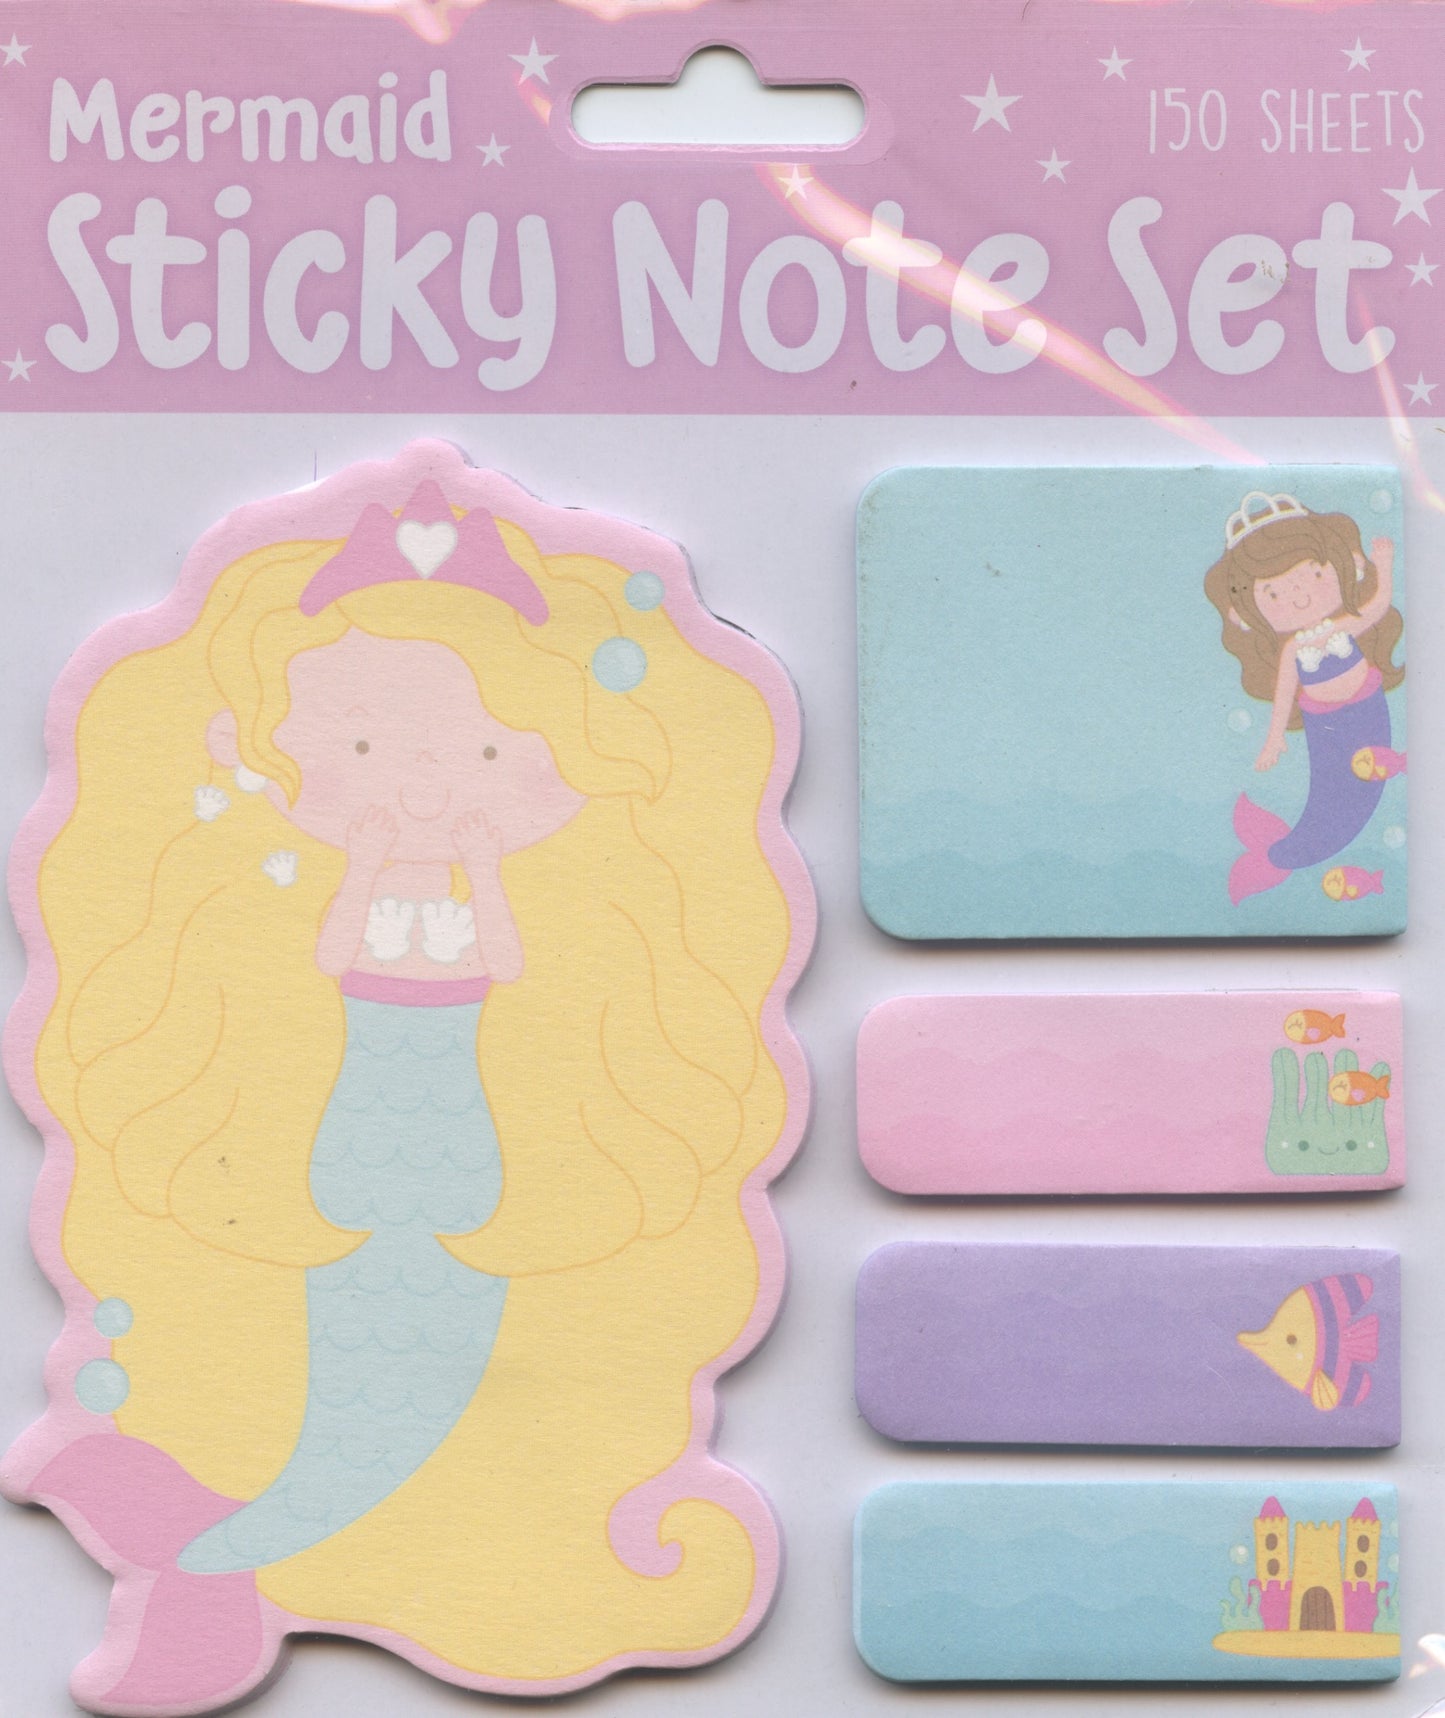 Mermaid Sticky Note Set - 150 Sheets